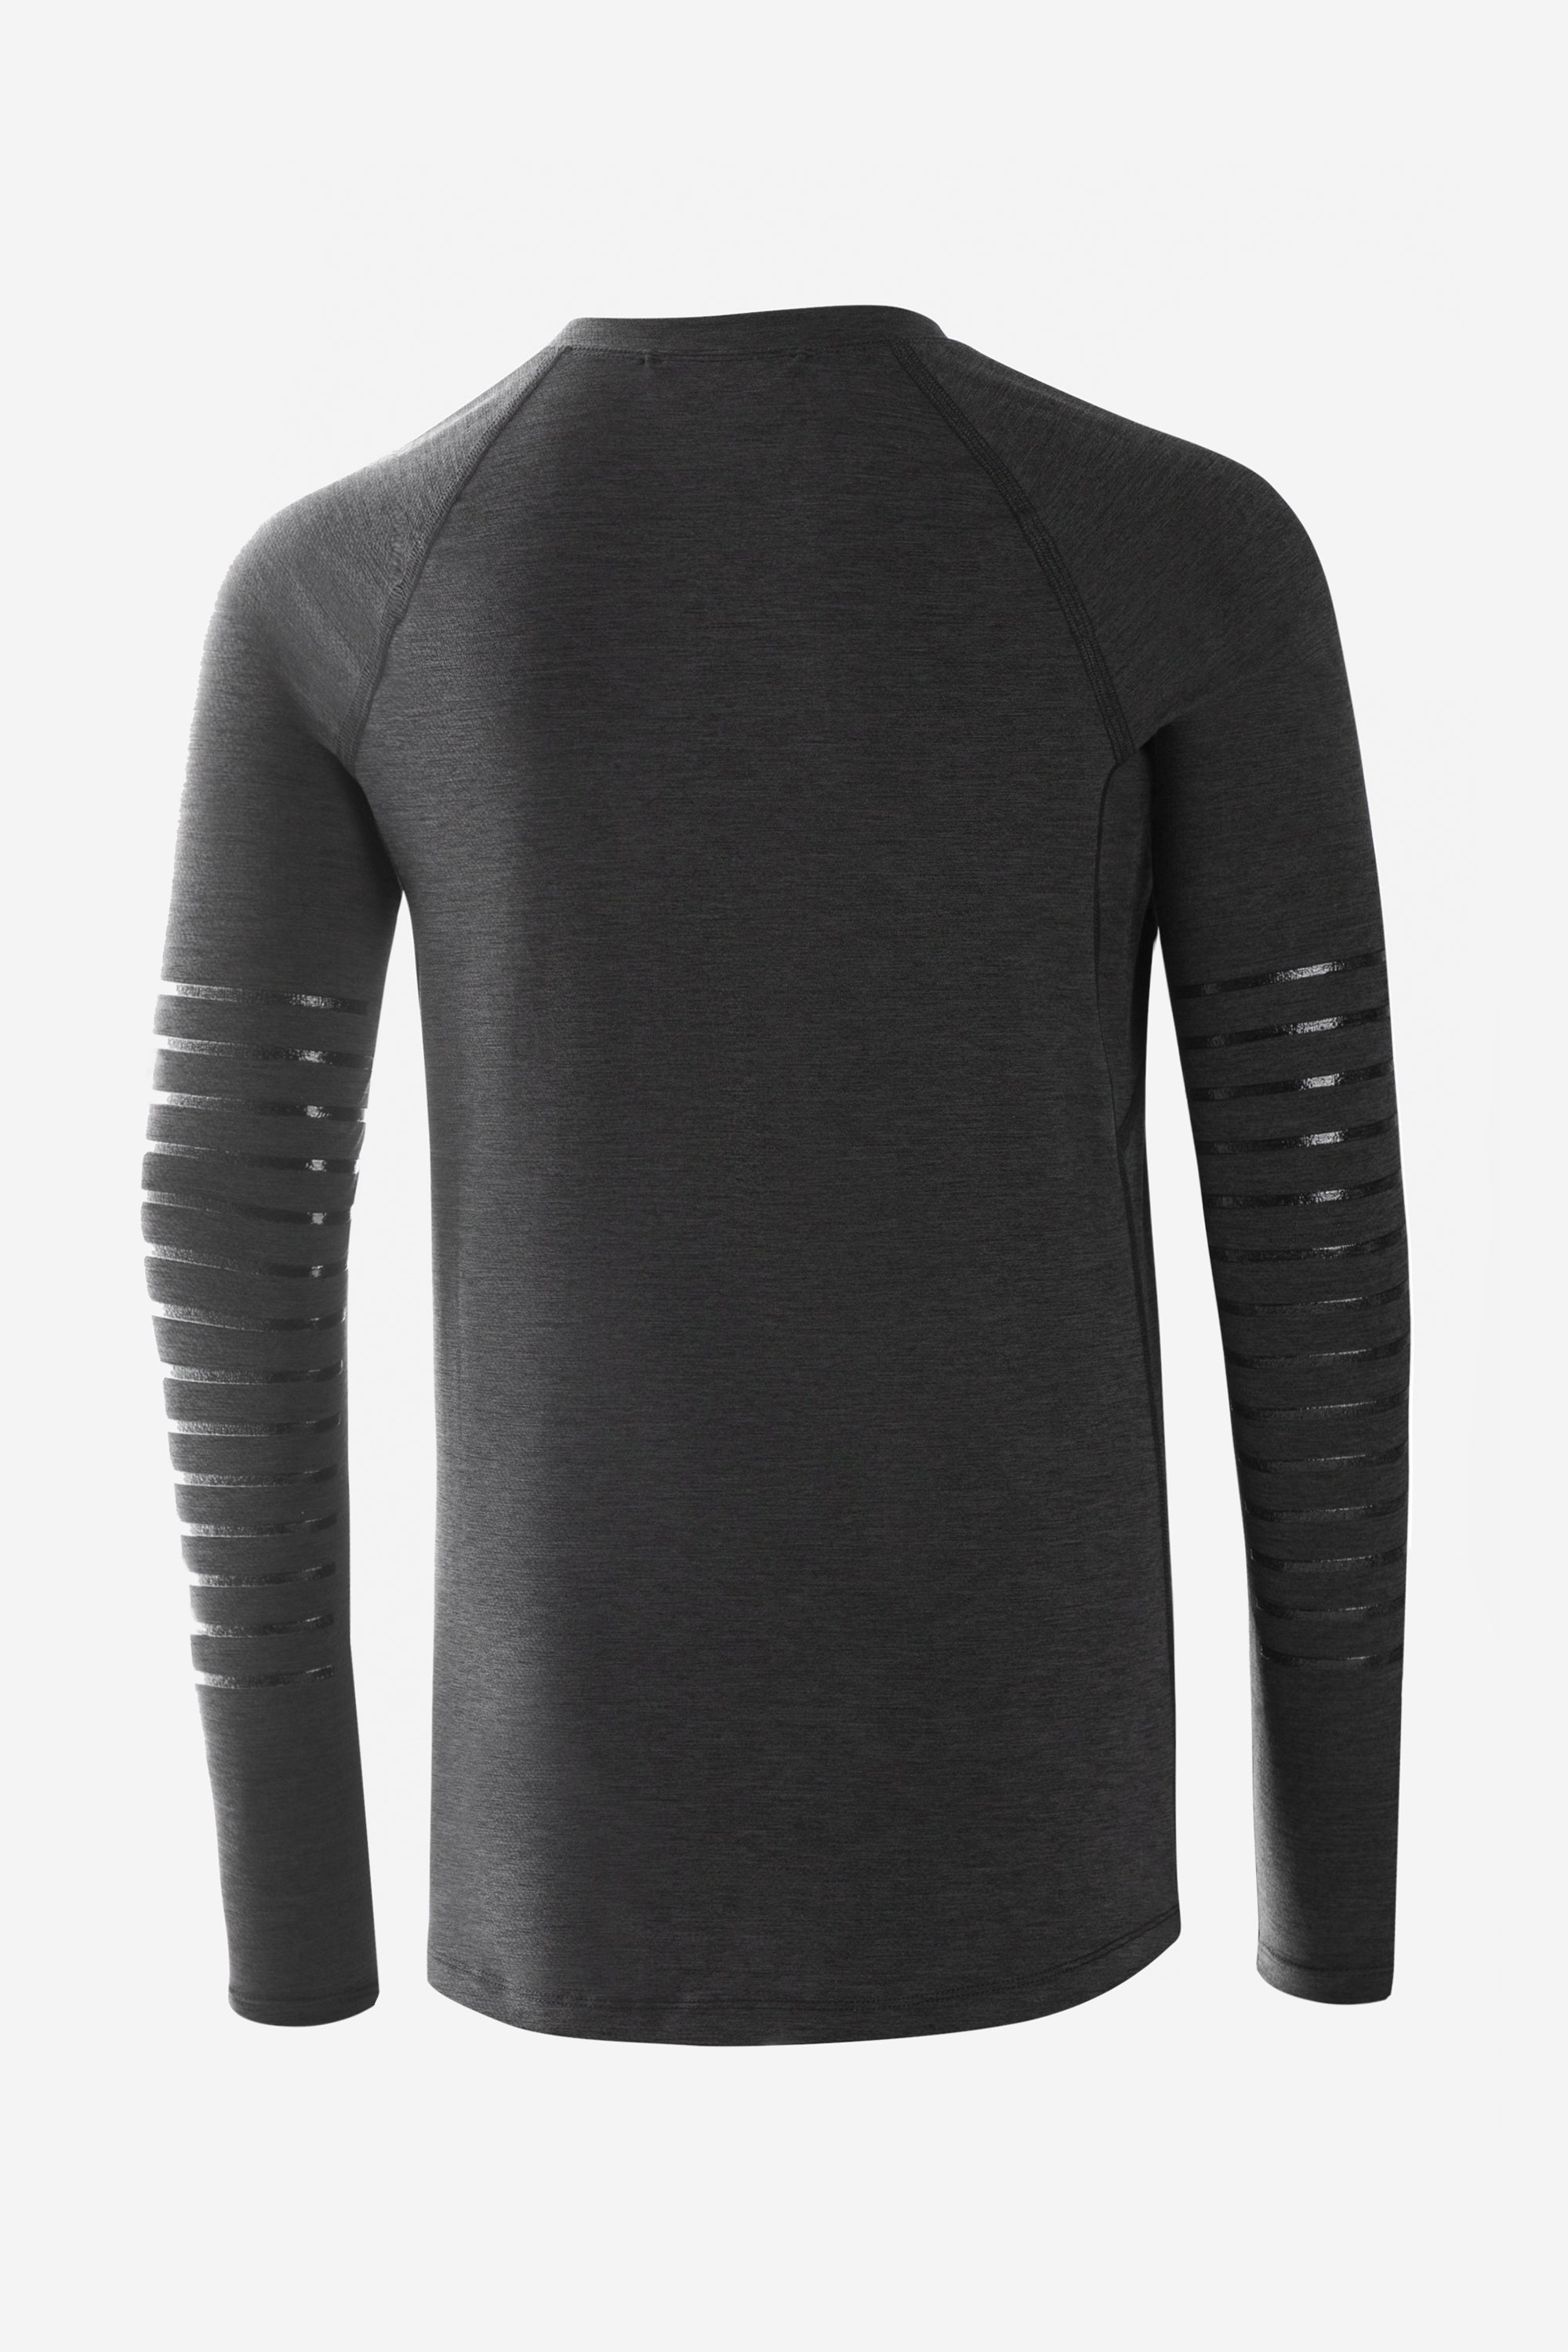 Youth black long sleeve hockey baser layer with 3d silicon stripes on the sleeves